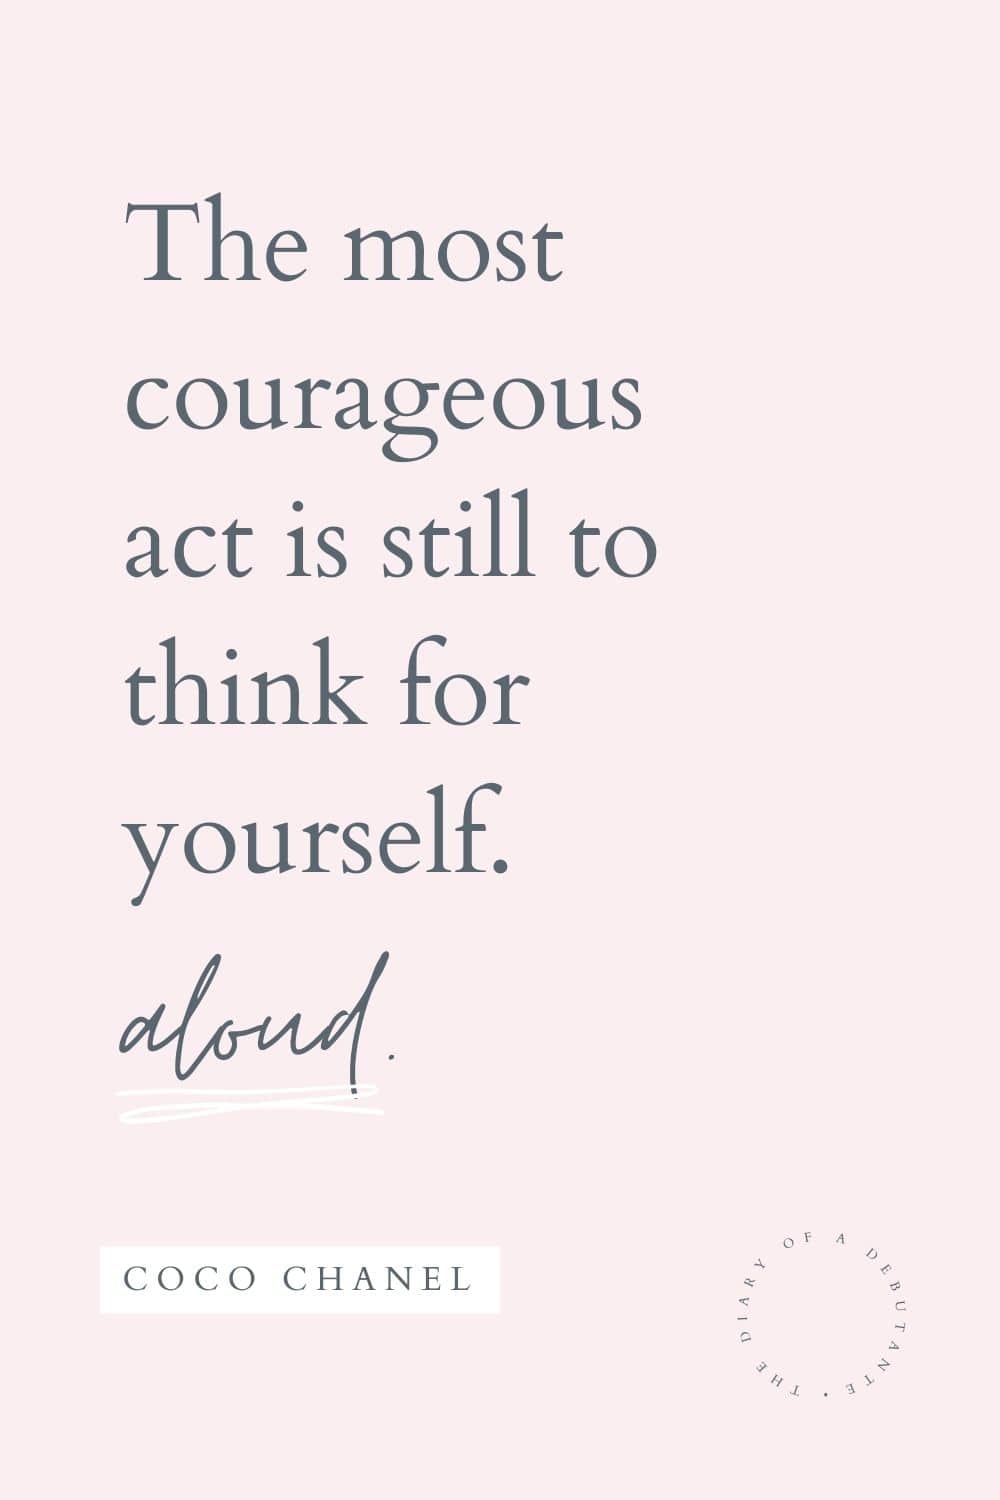 Coco Chanel think for yourself quote curated as part of a collection of daily inspirational quotes for women by blogger Stephanie Ziajka on Diary of a Debutante